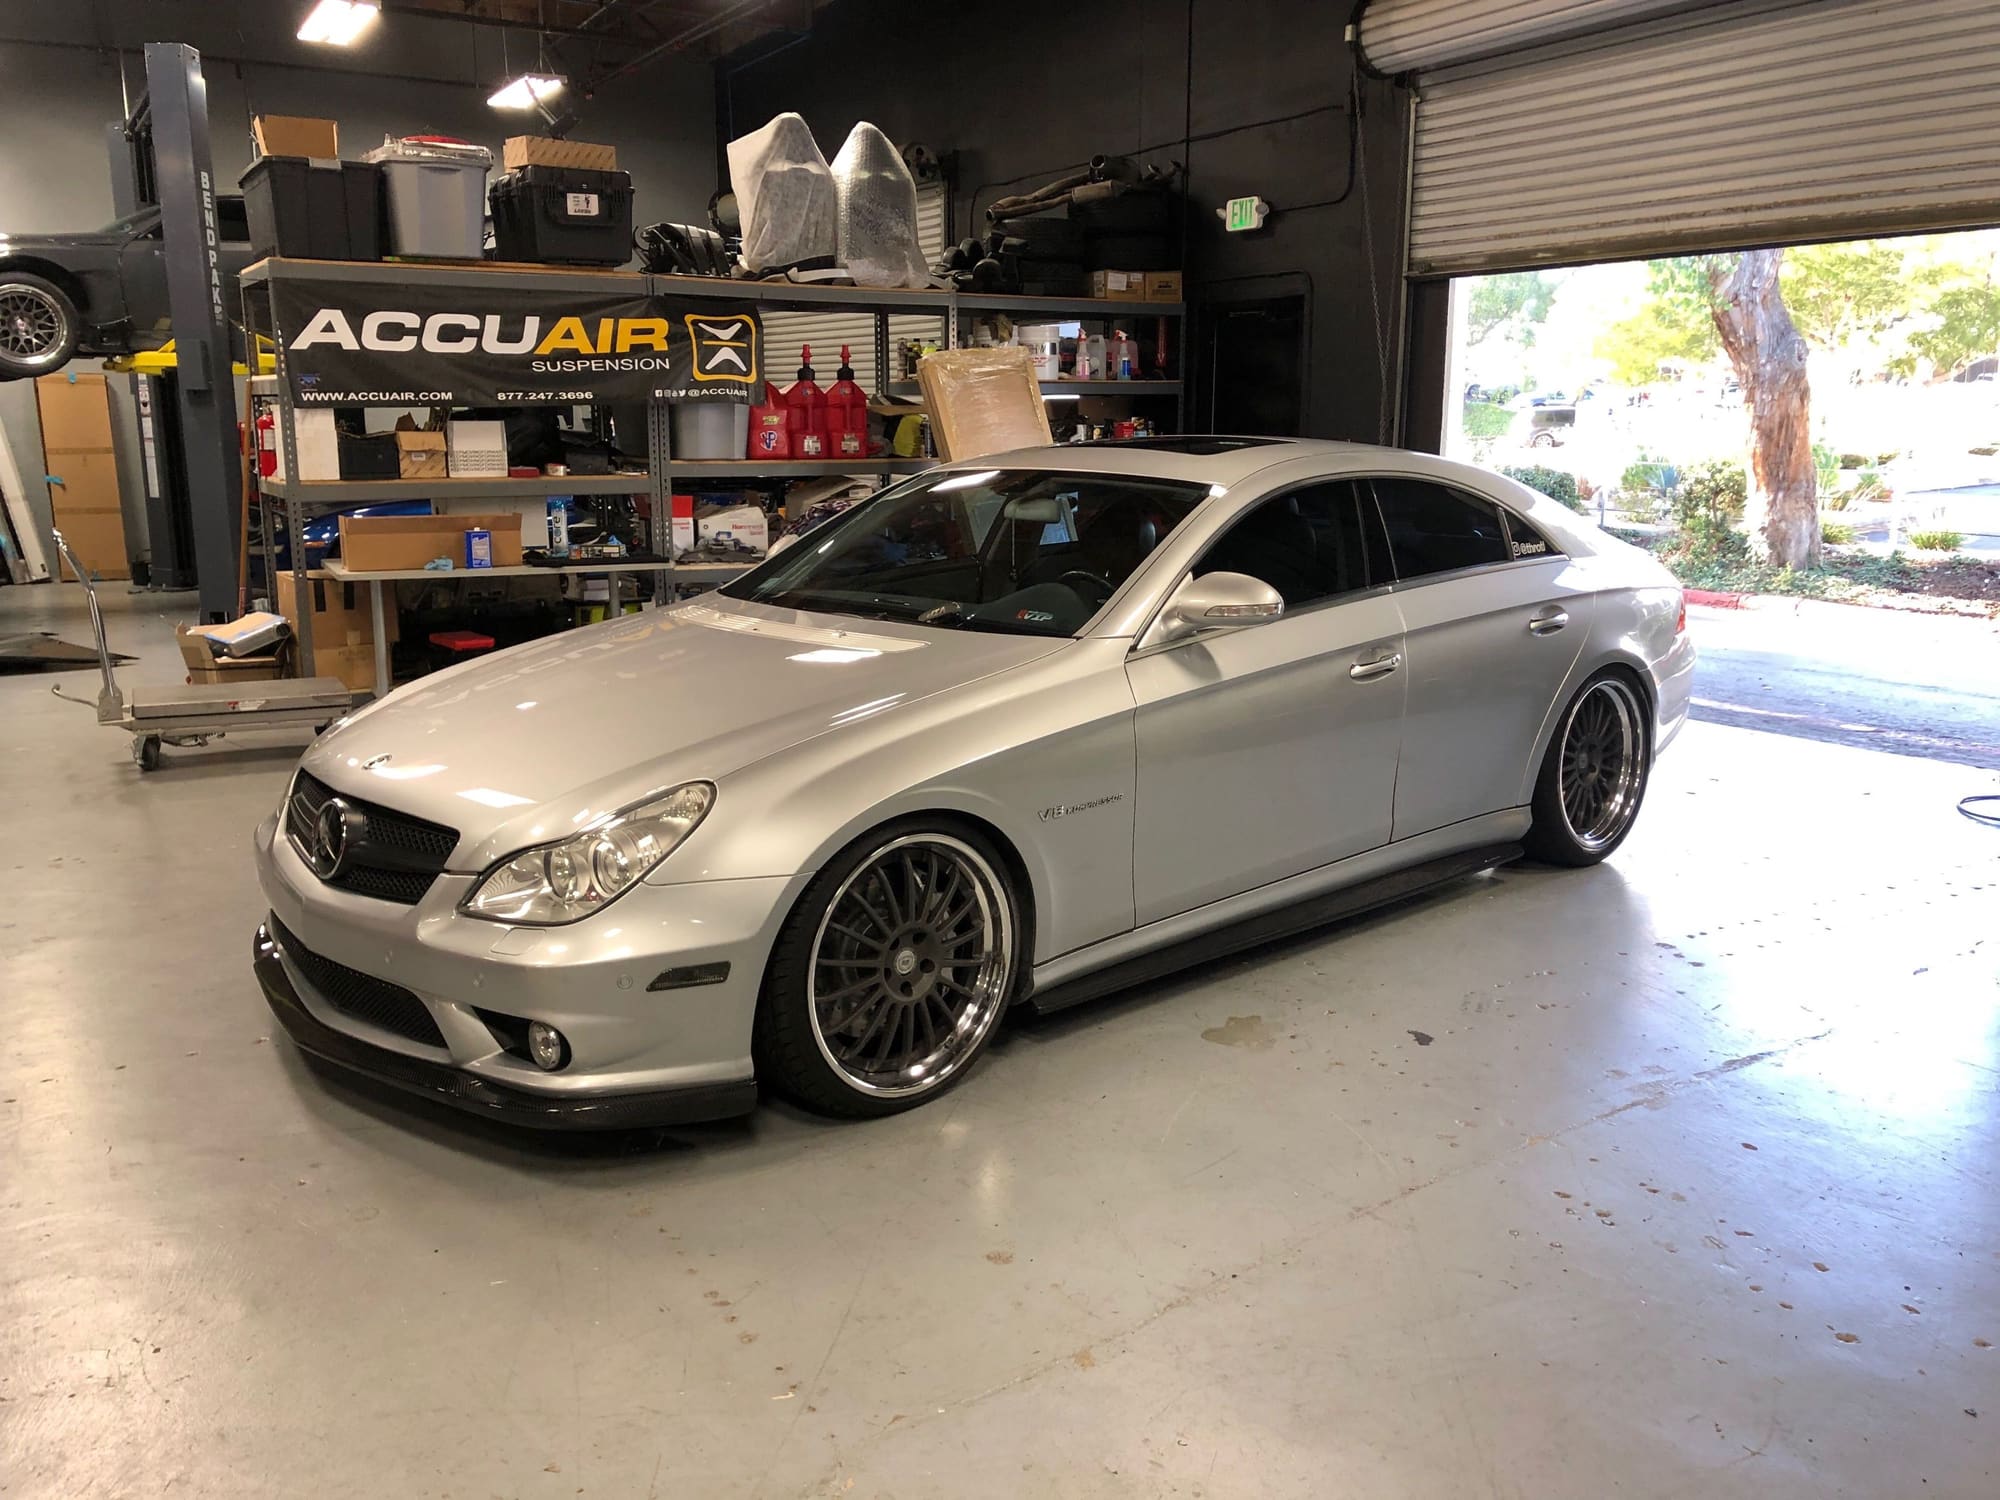 Wheels and Tires/Axles - 20" DPE Forged CS15 Wheels. CLK, CLS, E Fitment E55 E63 CLS63 CLS55 - Used - 1967 to 2019 Mercedes-Benz All Models - San Diego, CA 92121, United States